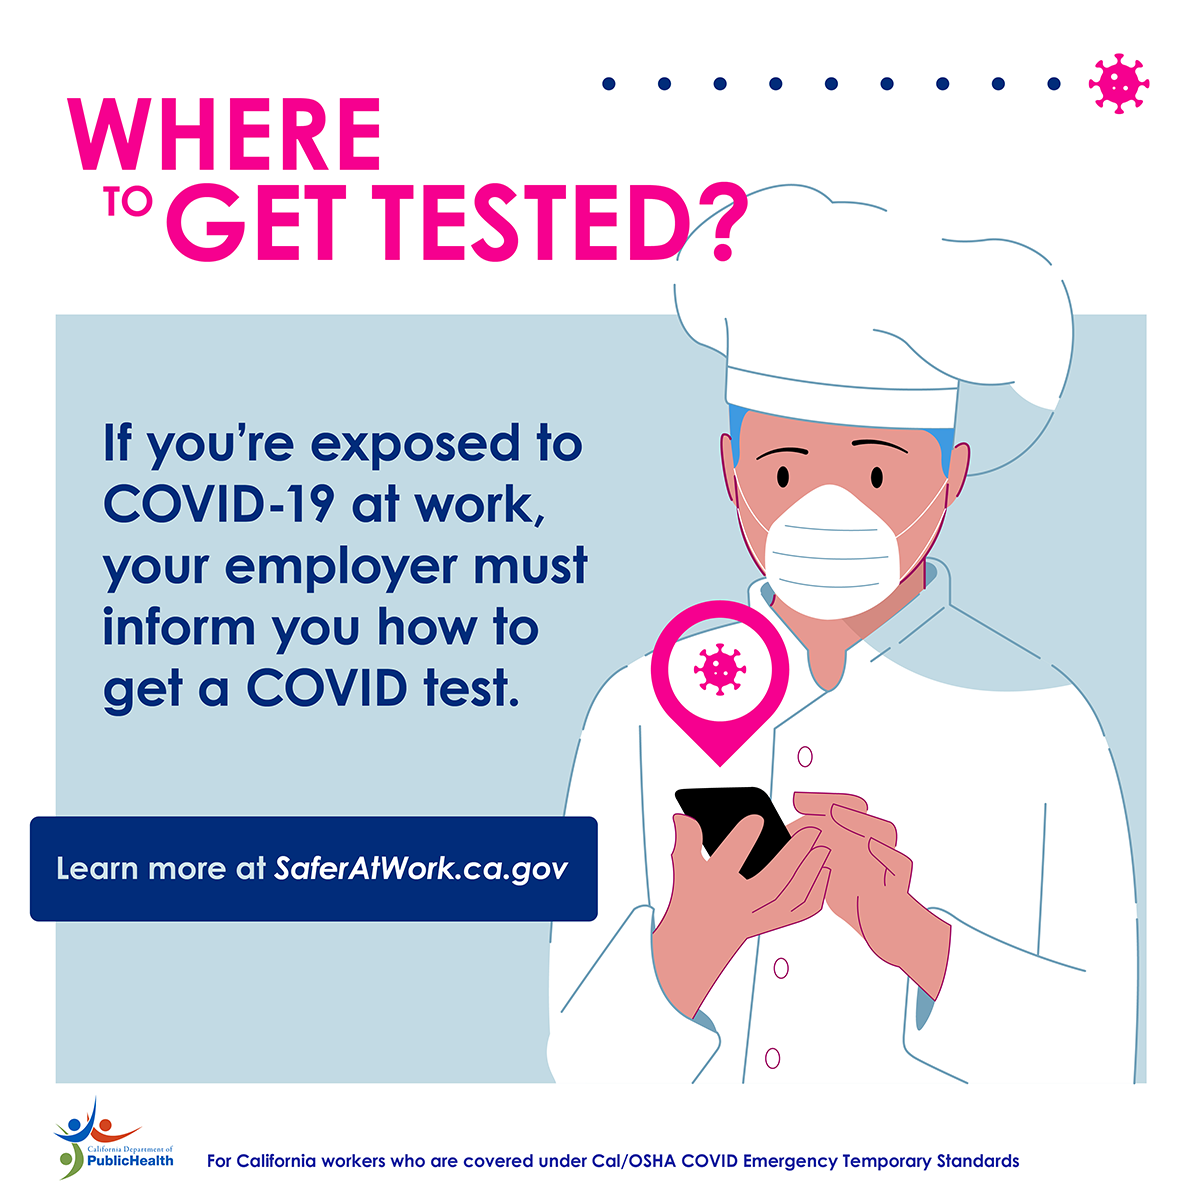 Check Covid Affected Premises, Your Exposure Risk On SELangkah - CodeBlue